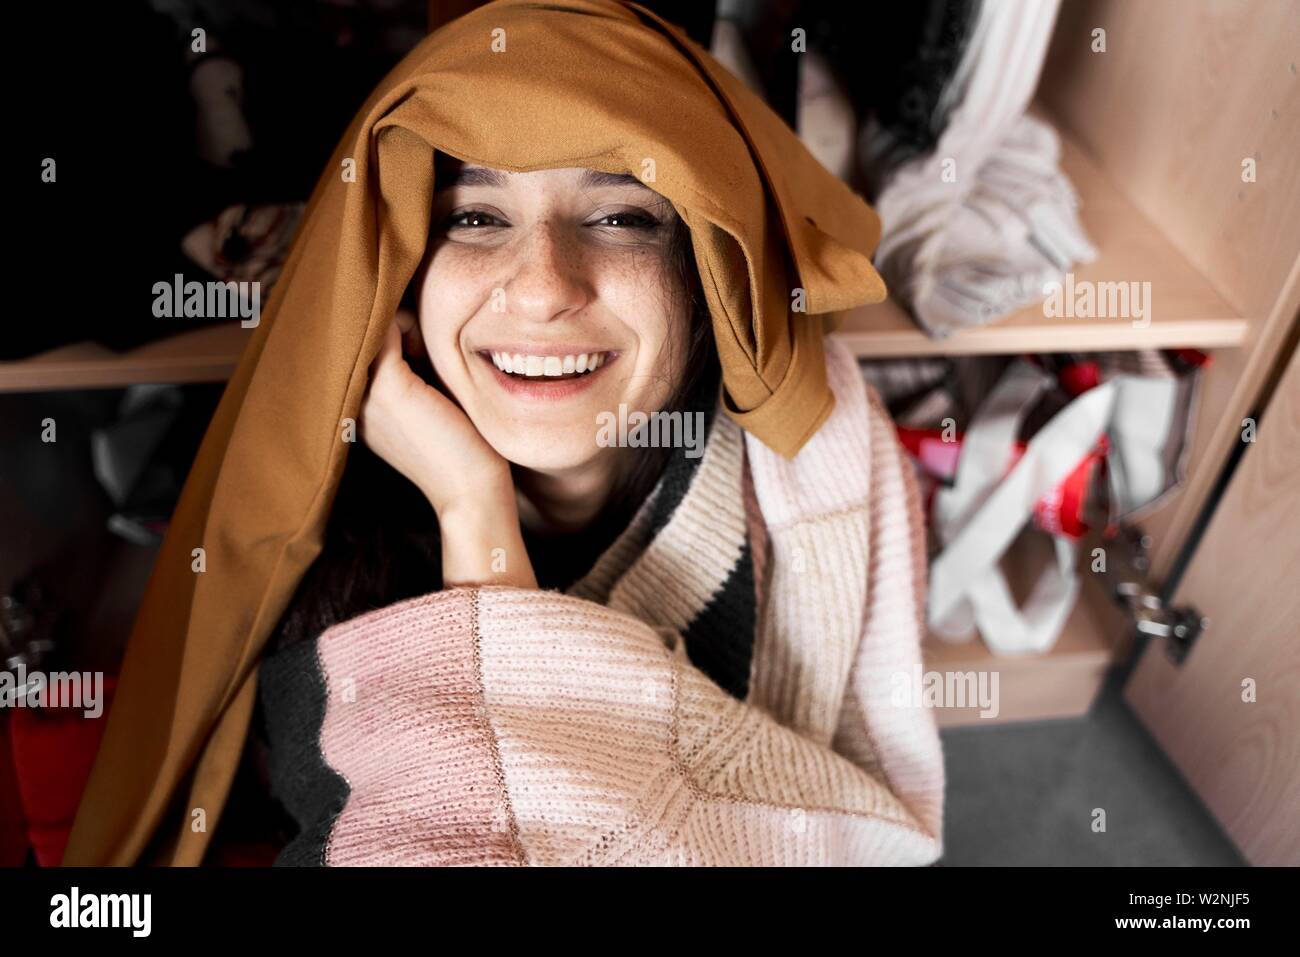 young smiling woman overwhelmed by her clothes Stock Photo